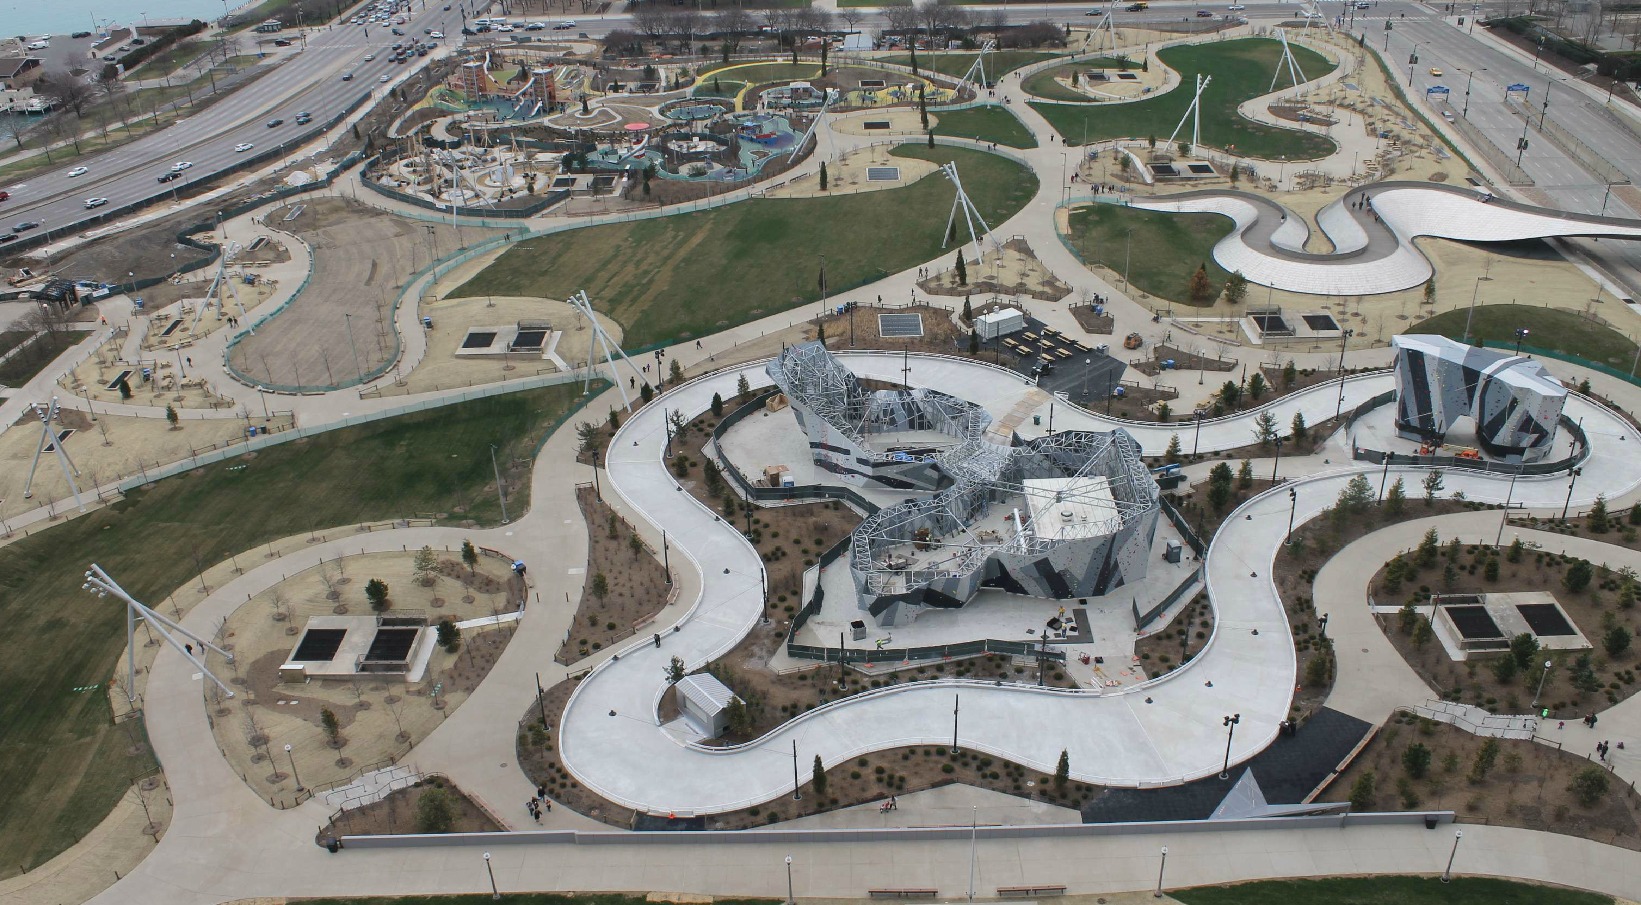 Maggie Daley Park Overview